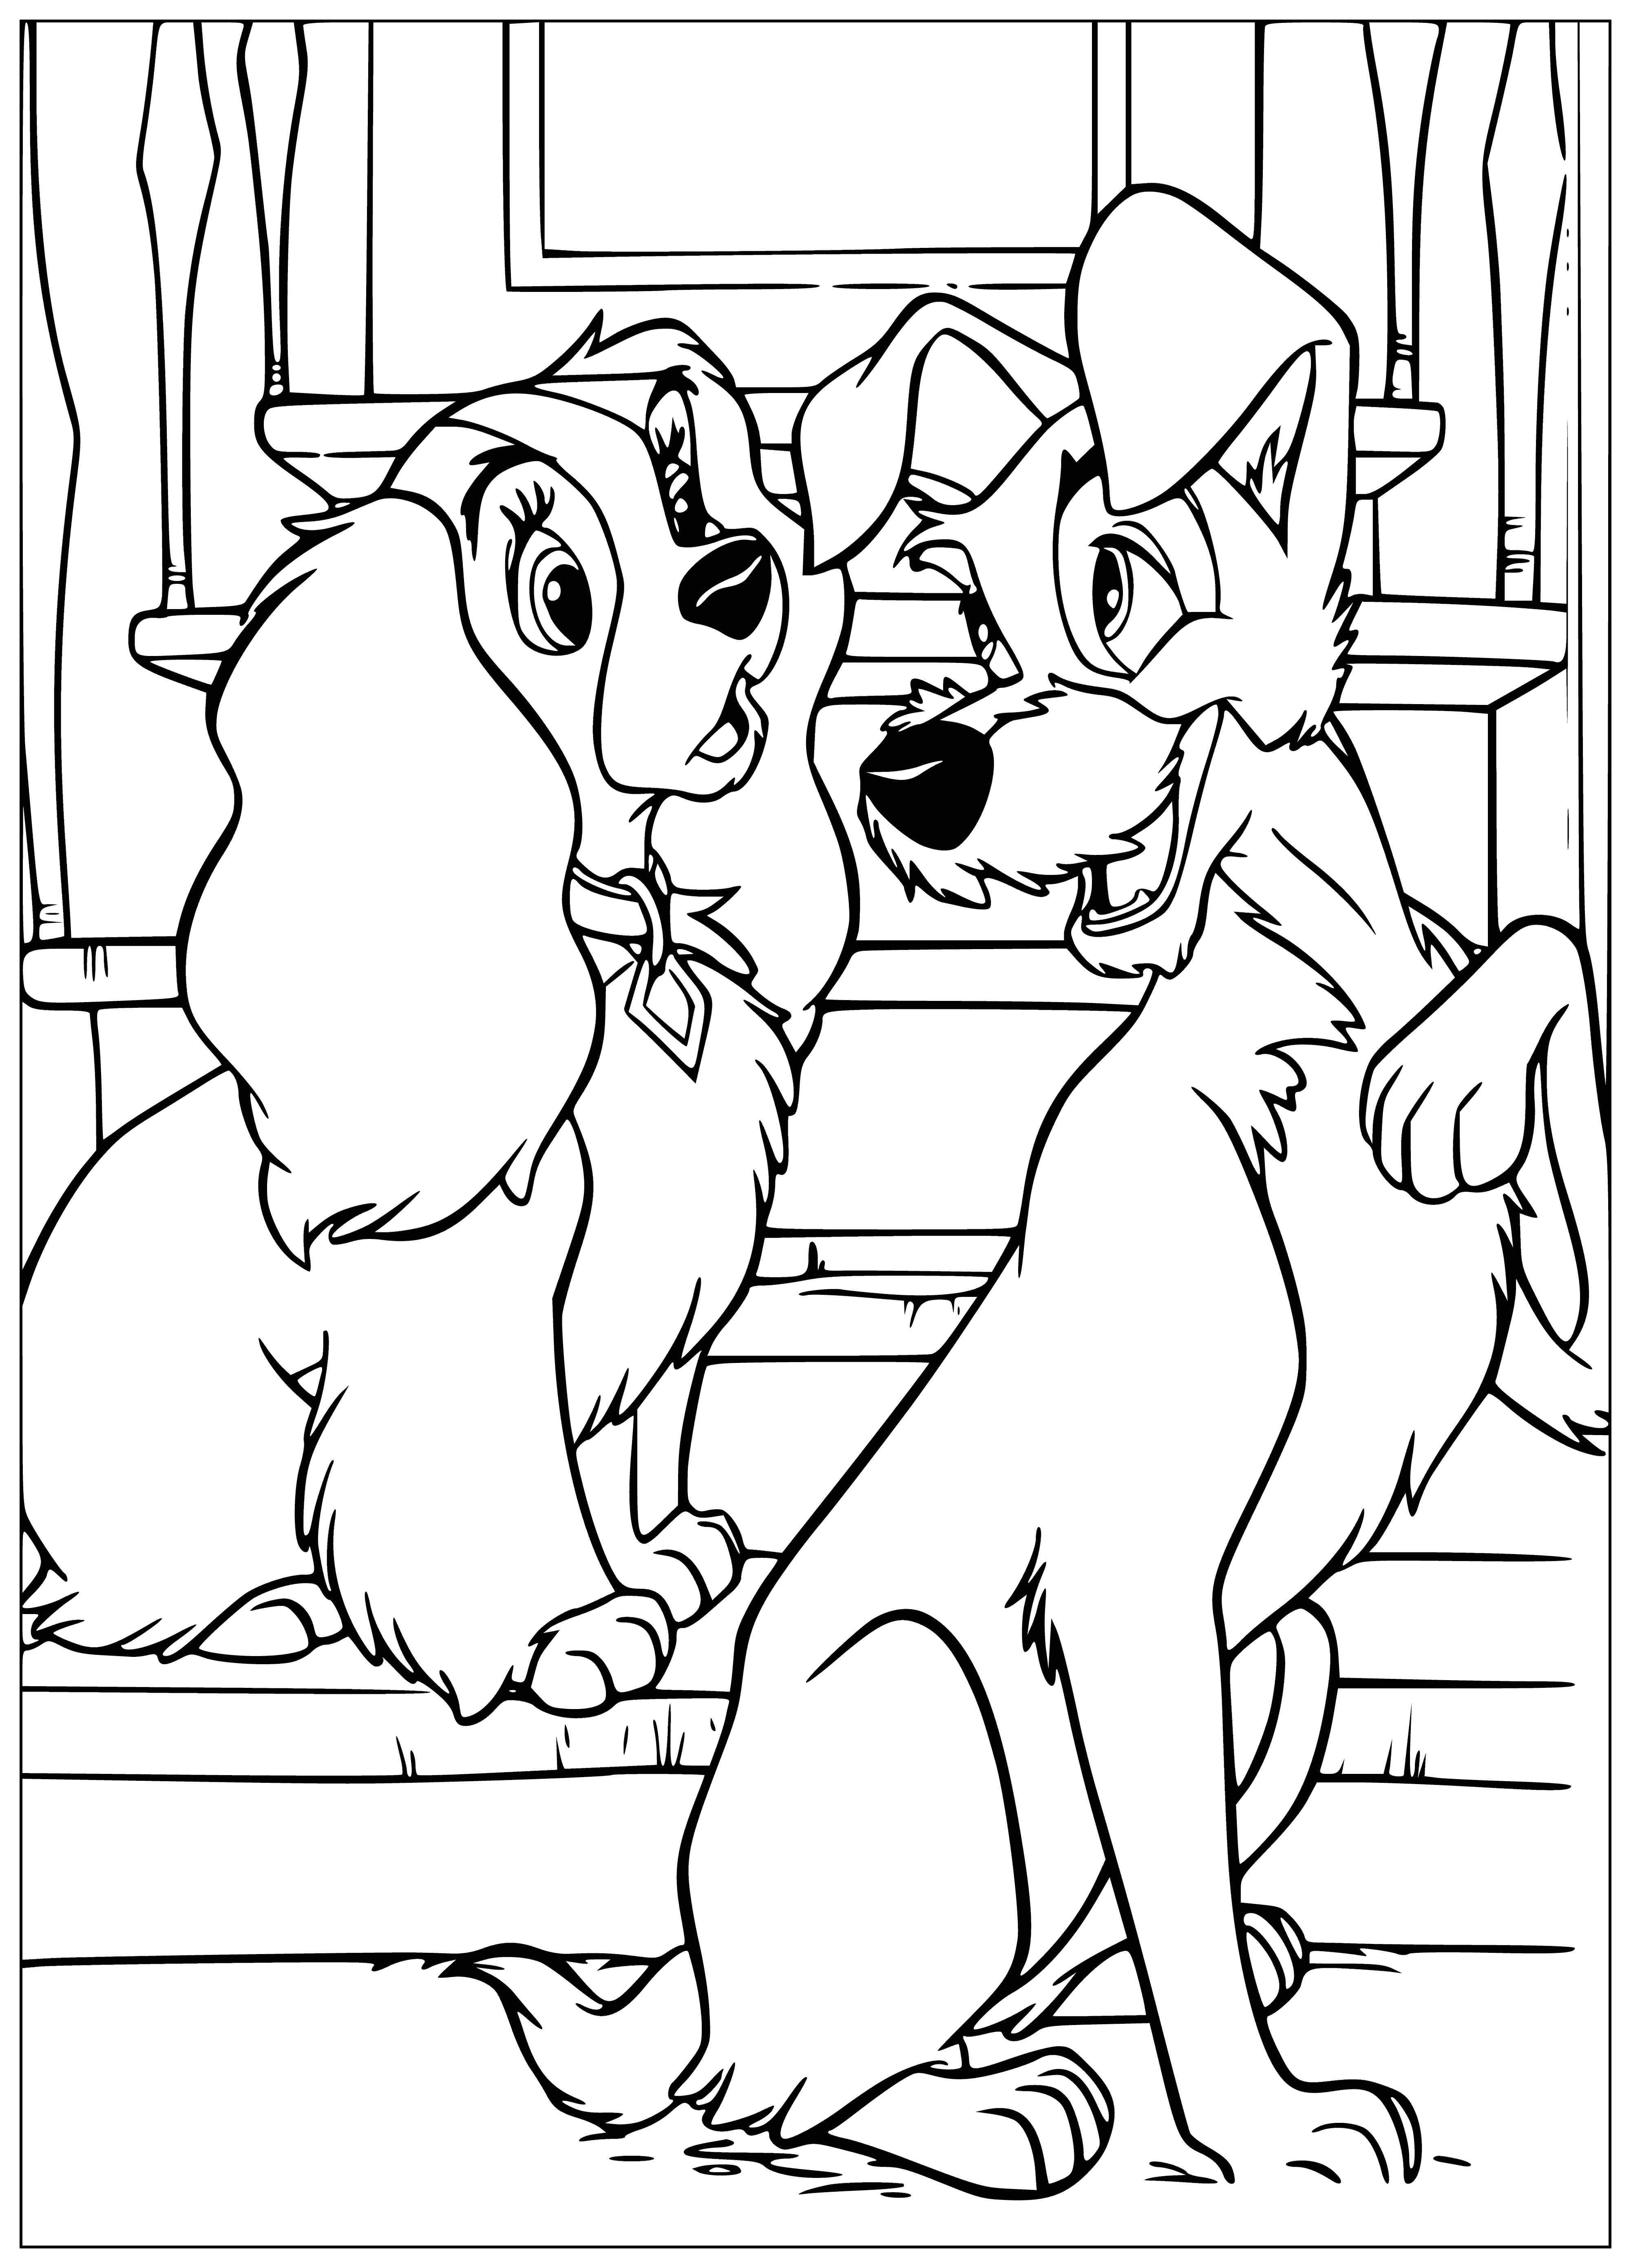 coloring page: Two smiling dogs: small white long-ear, standing on large brown short-ear with black nose.